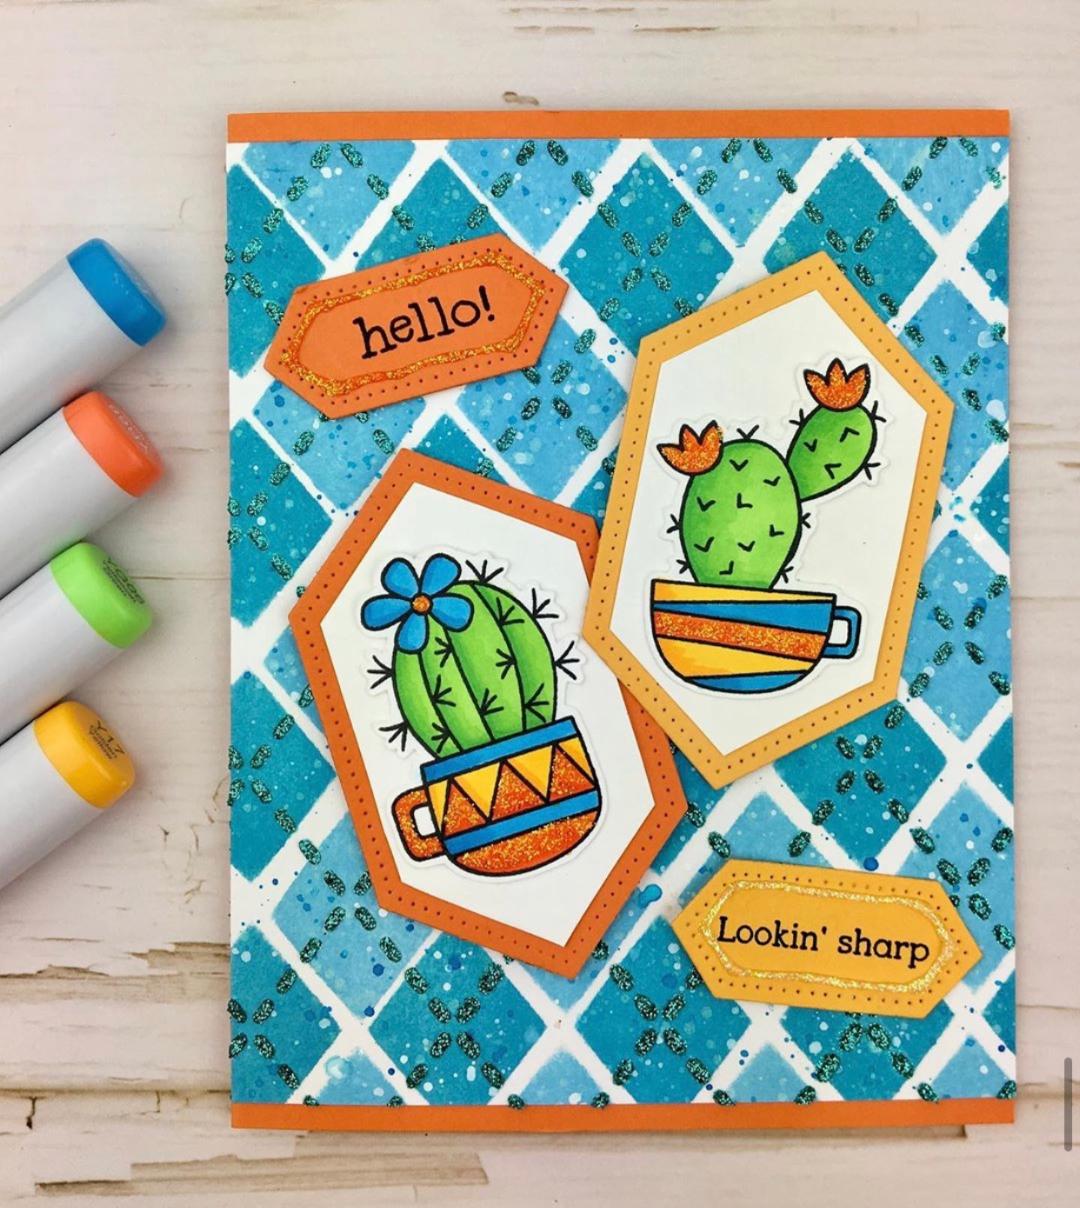 Fan Feature Week - Day 2 | Cactus Card by Meghan Kennihan Cuppa Cactus Stamp Set and Argyle Stencil Set by Newton's Nook Designs #newtonsnook #handmade